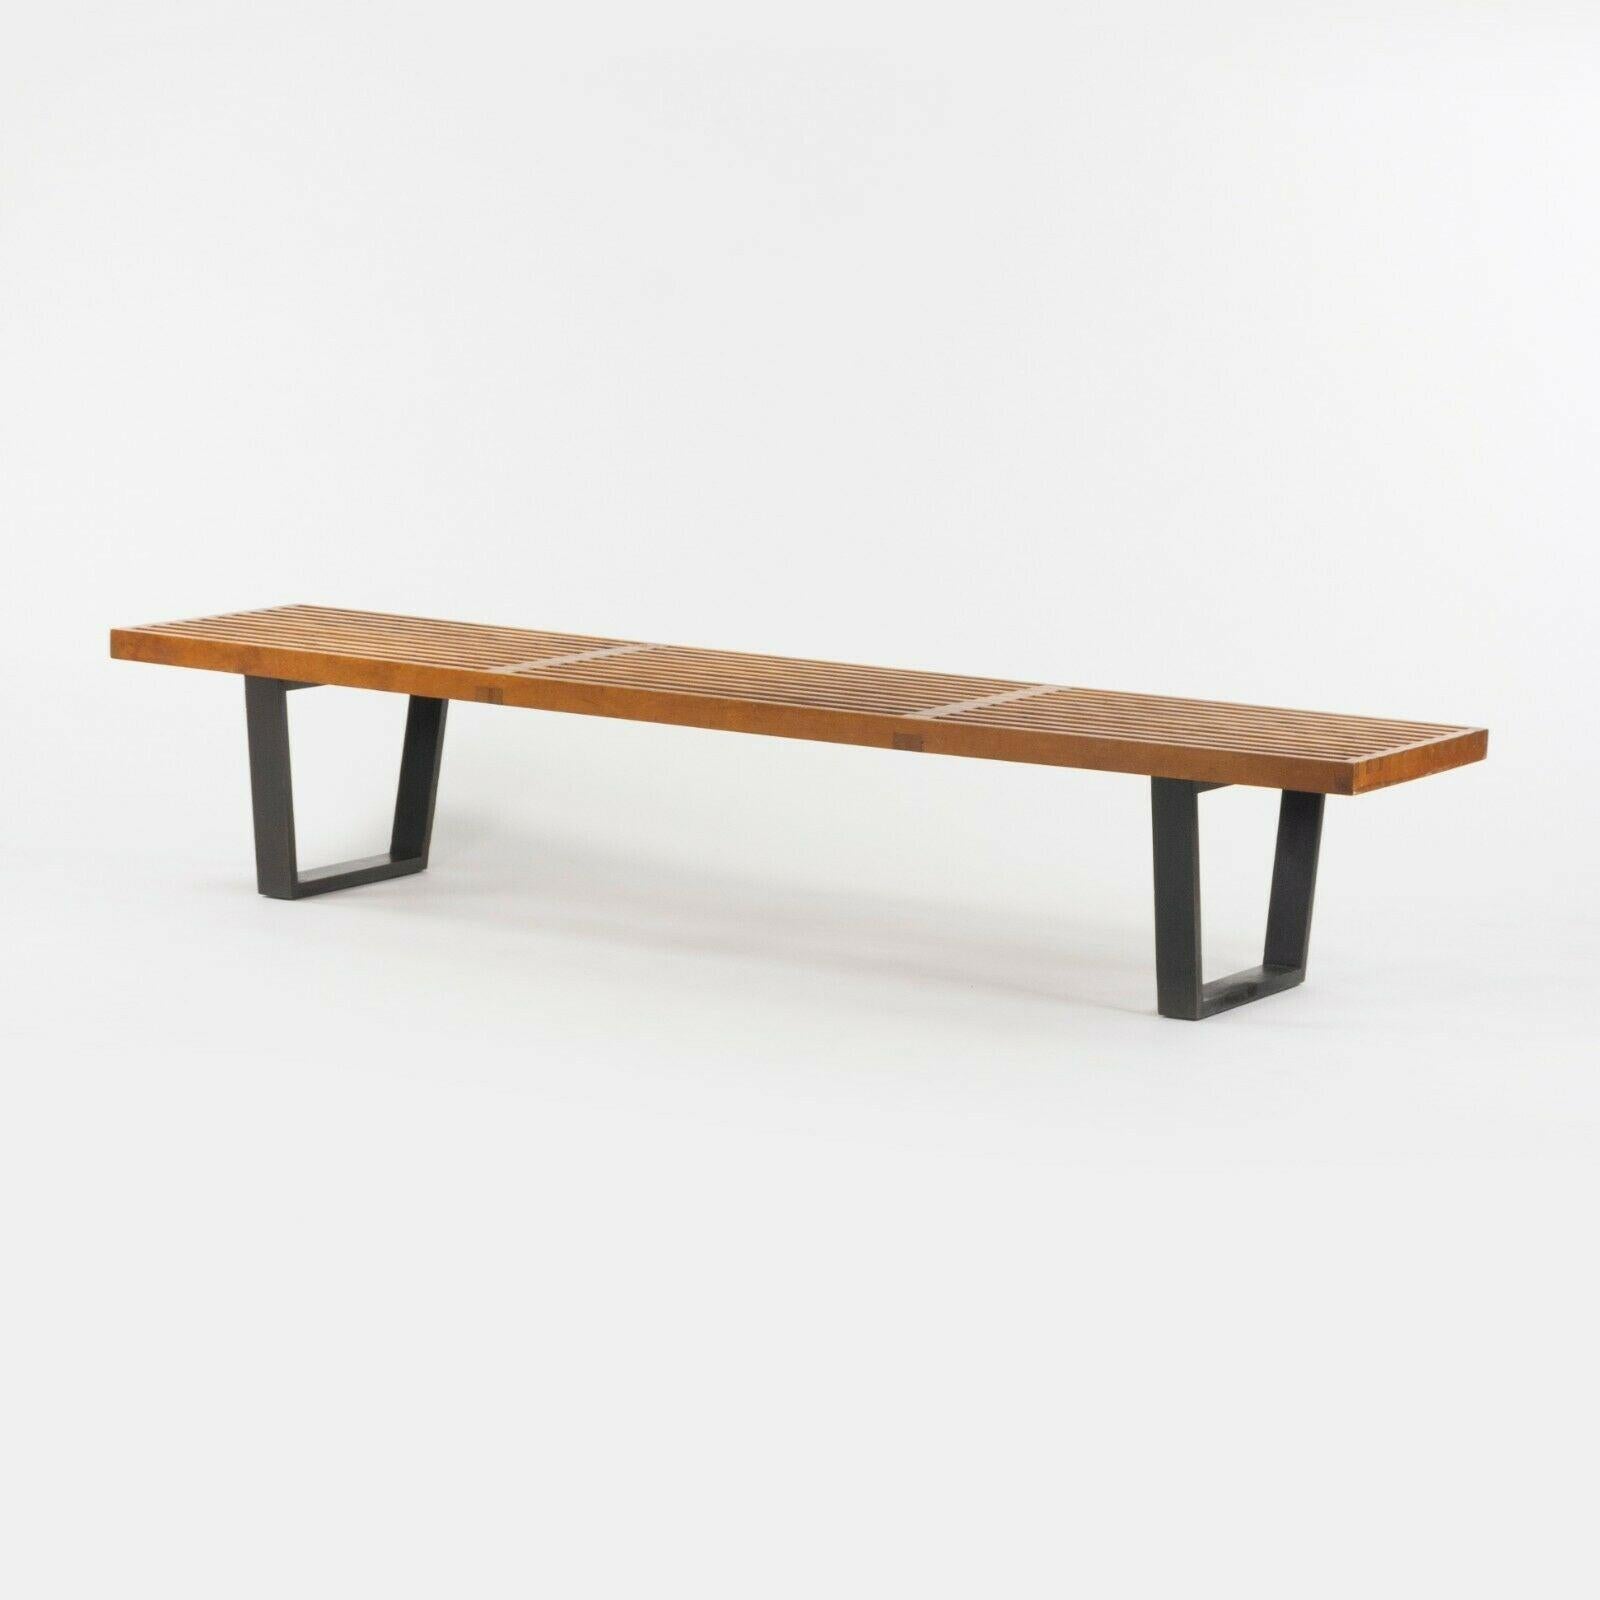 Listed for sale is a 1950s vintage George Nelson for Herman Miller natural and black-lacquered birch platform bench (Model 4692). This classic George Nelson example has a gorgeous patina on the natural wood surface and throughout. The legs are